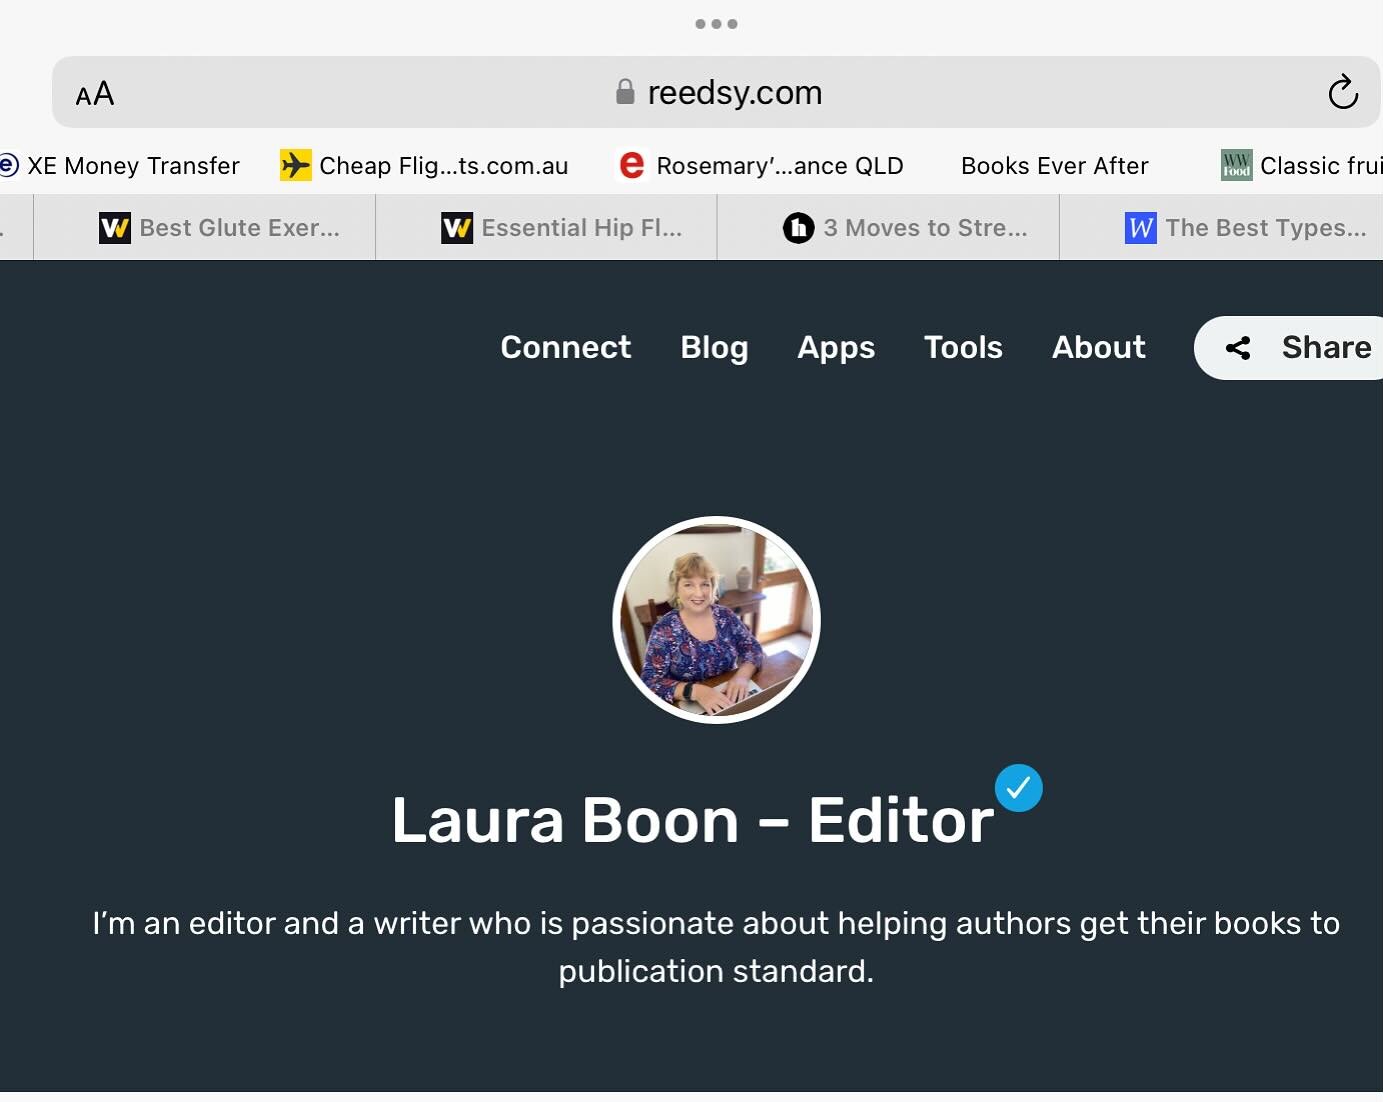 My editing services are now available through Reedsy, an international marketplace for authors available in 600 cities and 30 countries. Their vigorous screening process gives authors peace of mind regarding the service they engage. Link in my bio.